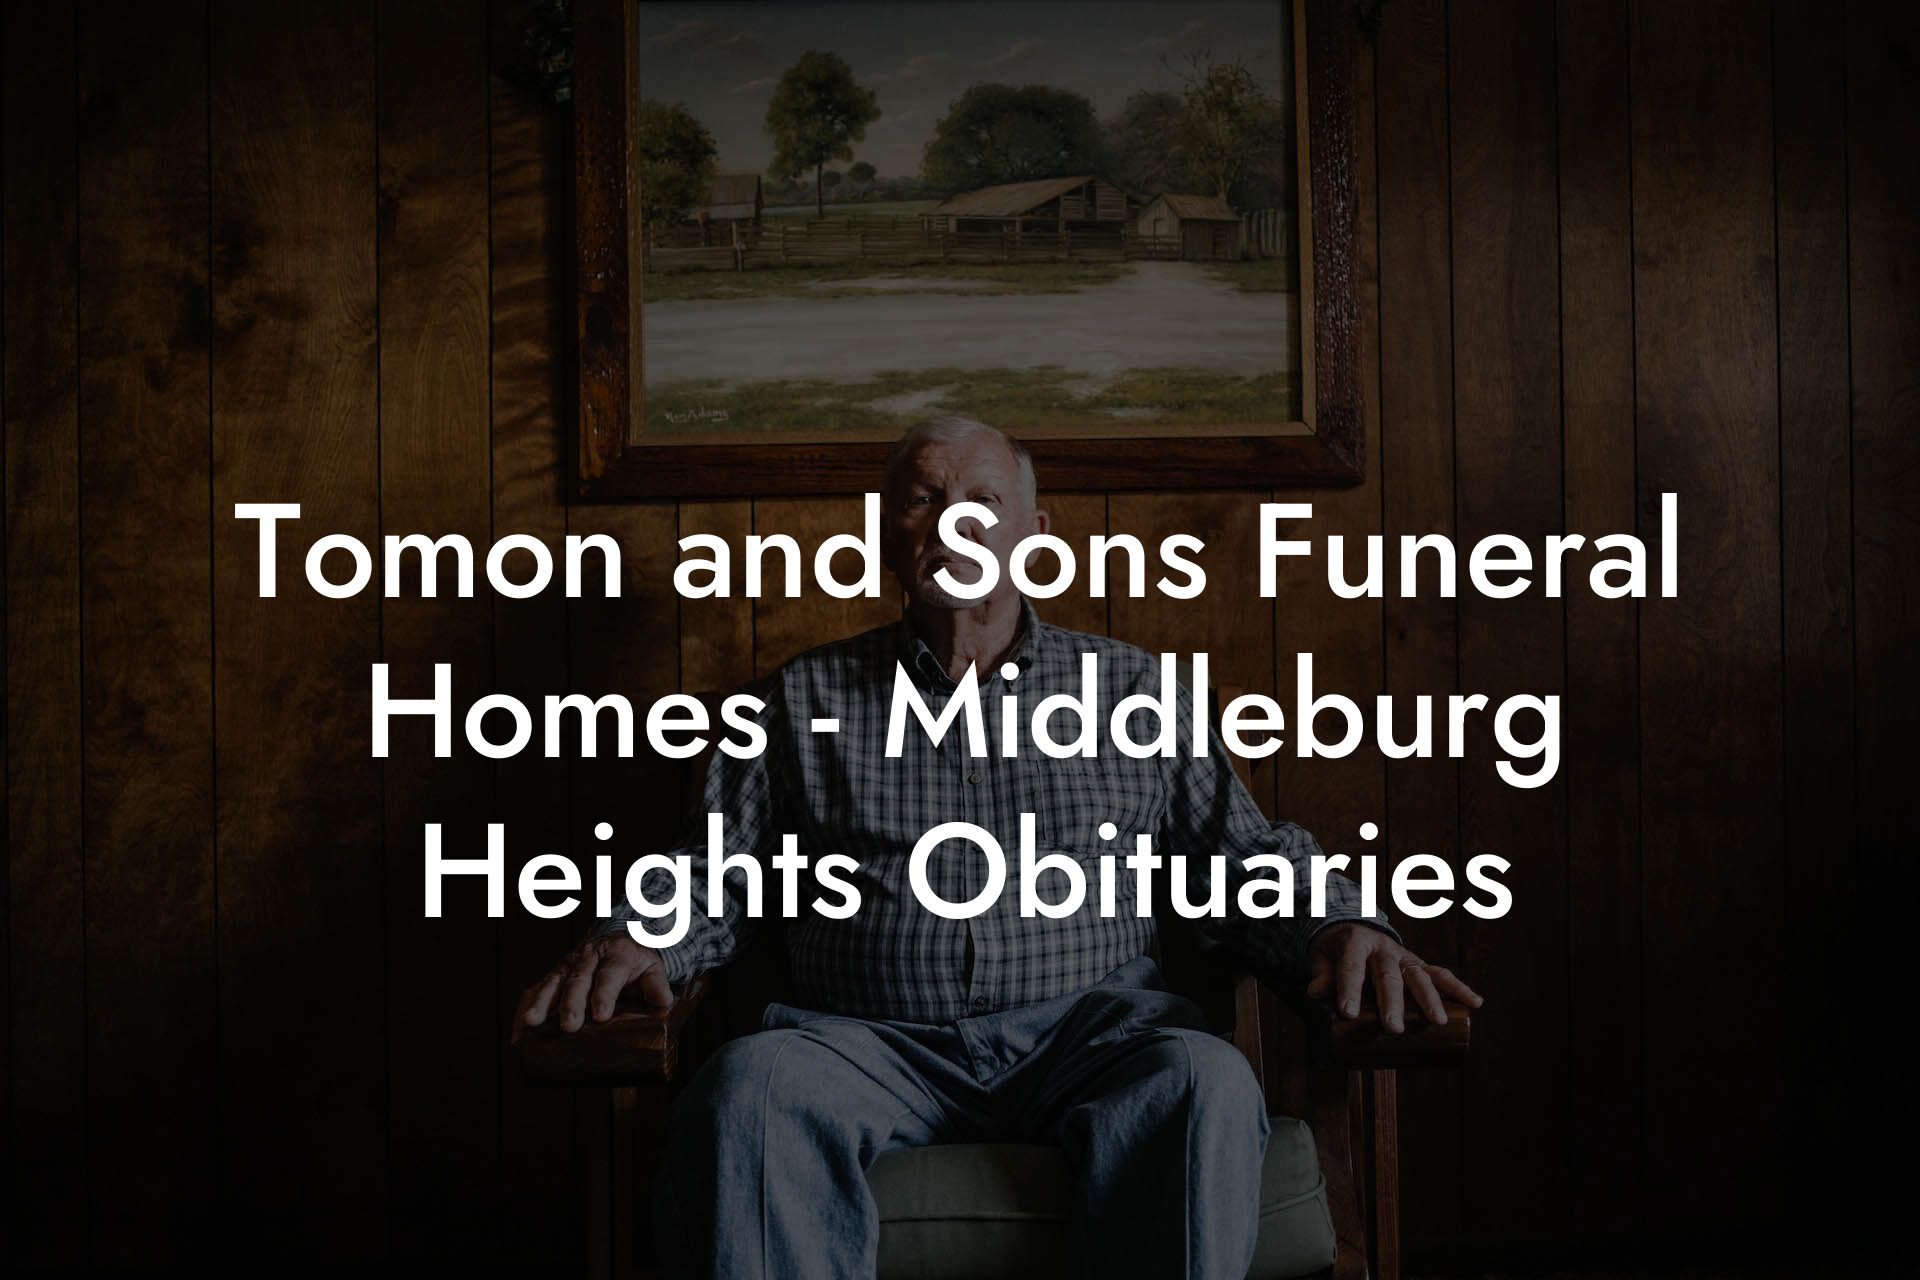 Tomon and Sons Funeral Homes - Middleburg Heights Obituaries